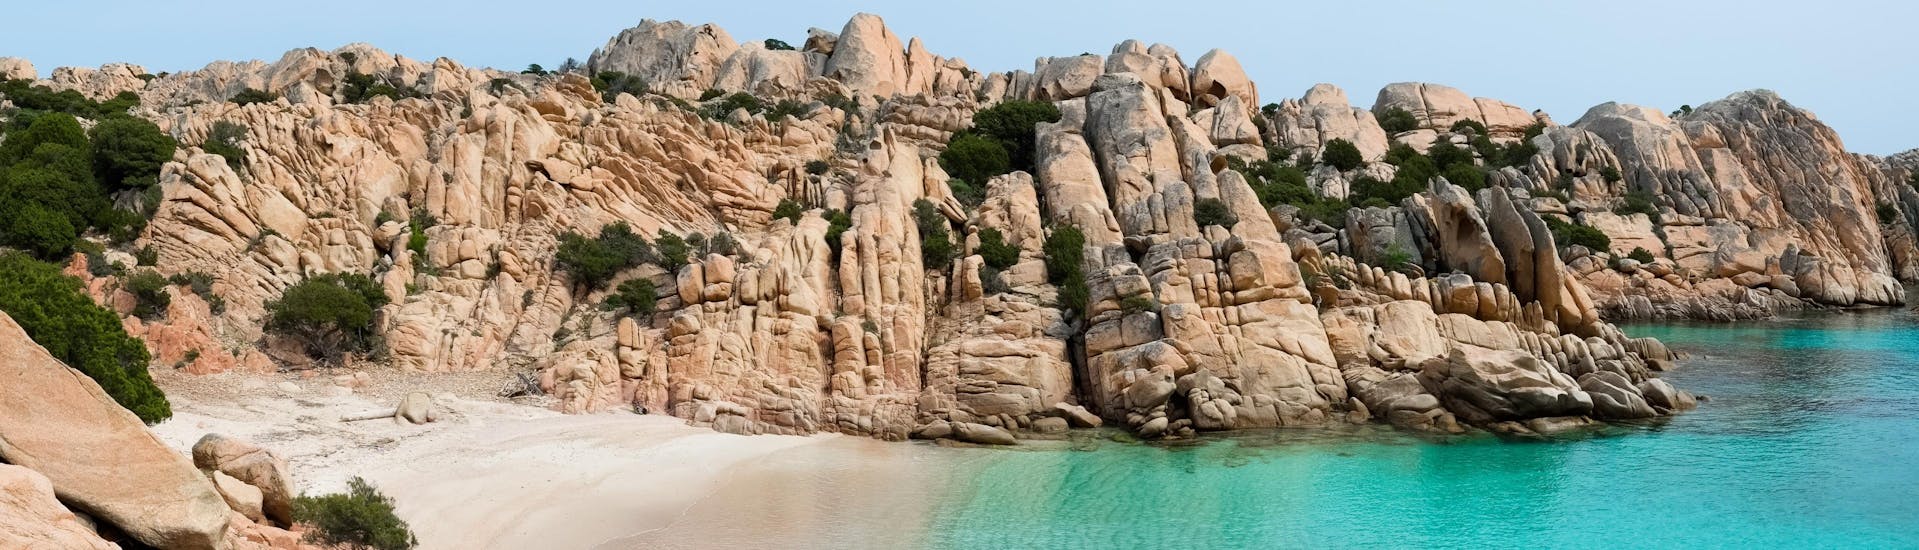 The stunning Cala Coticcio beach, that you can discover on a boat trip to Caprera Island.